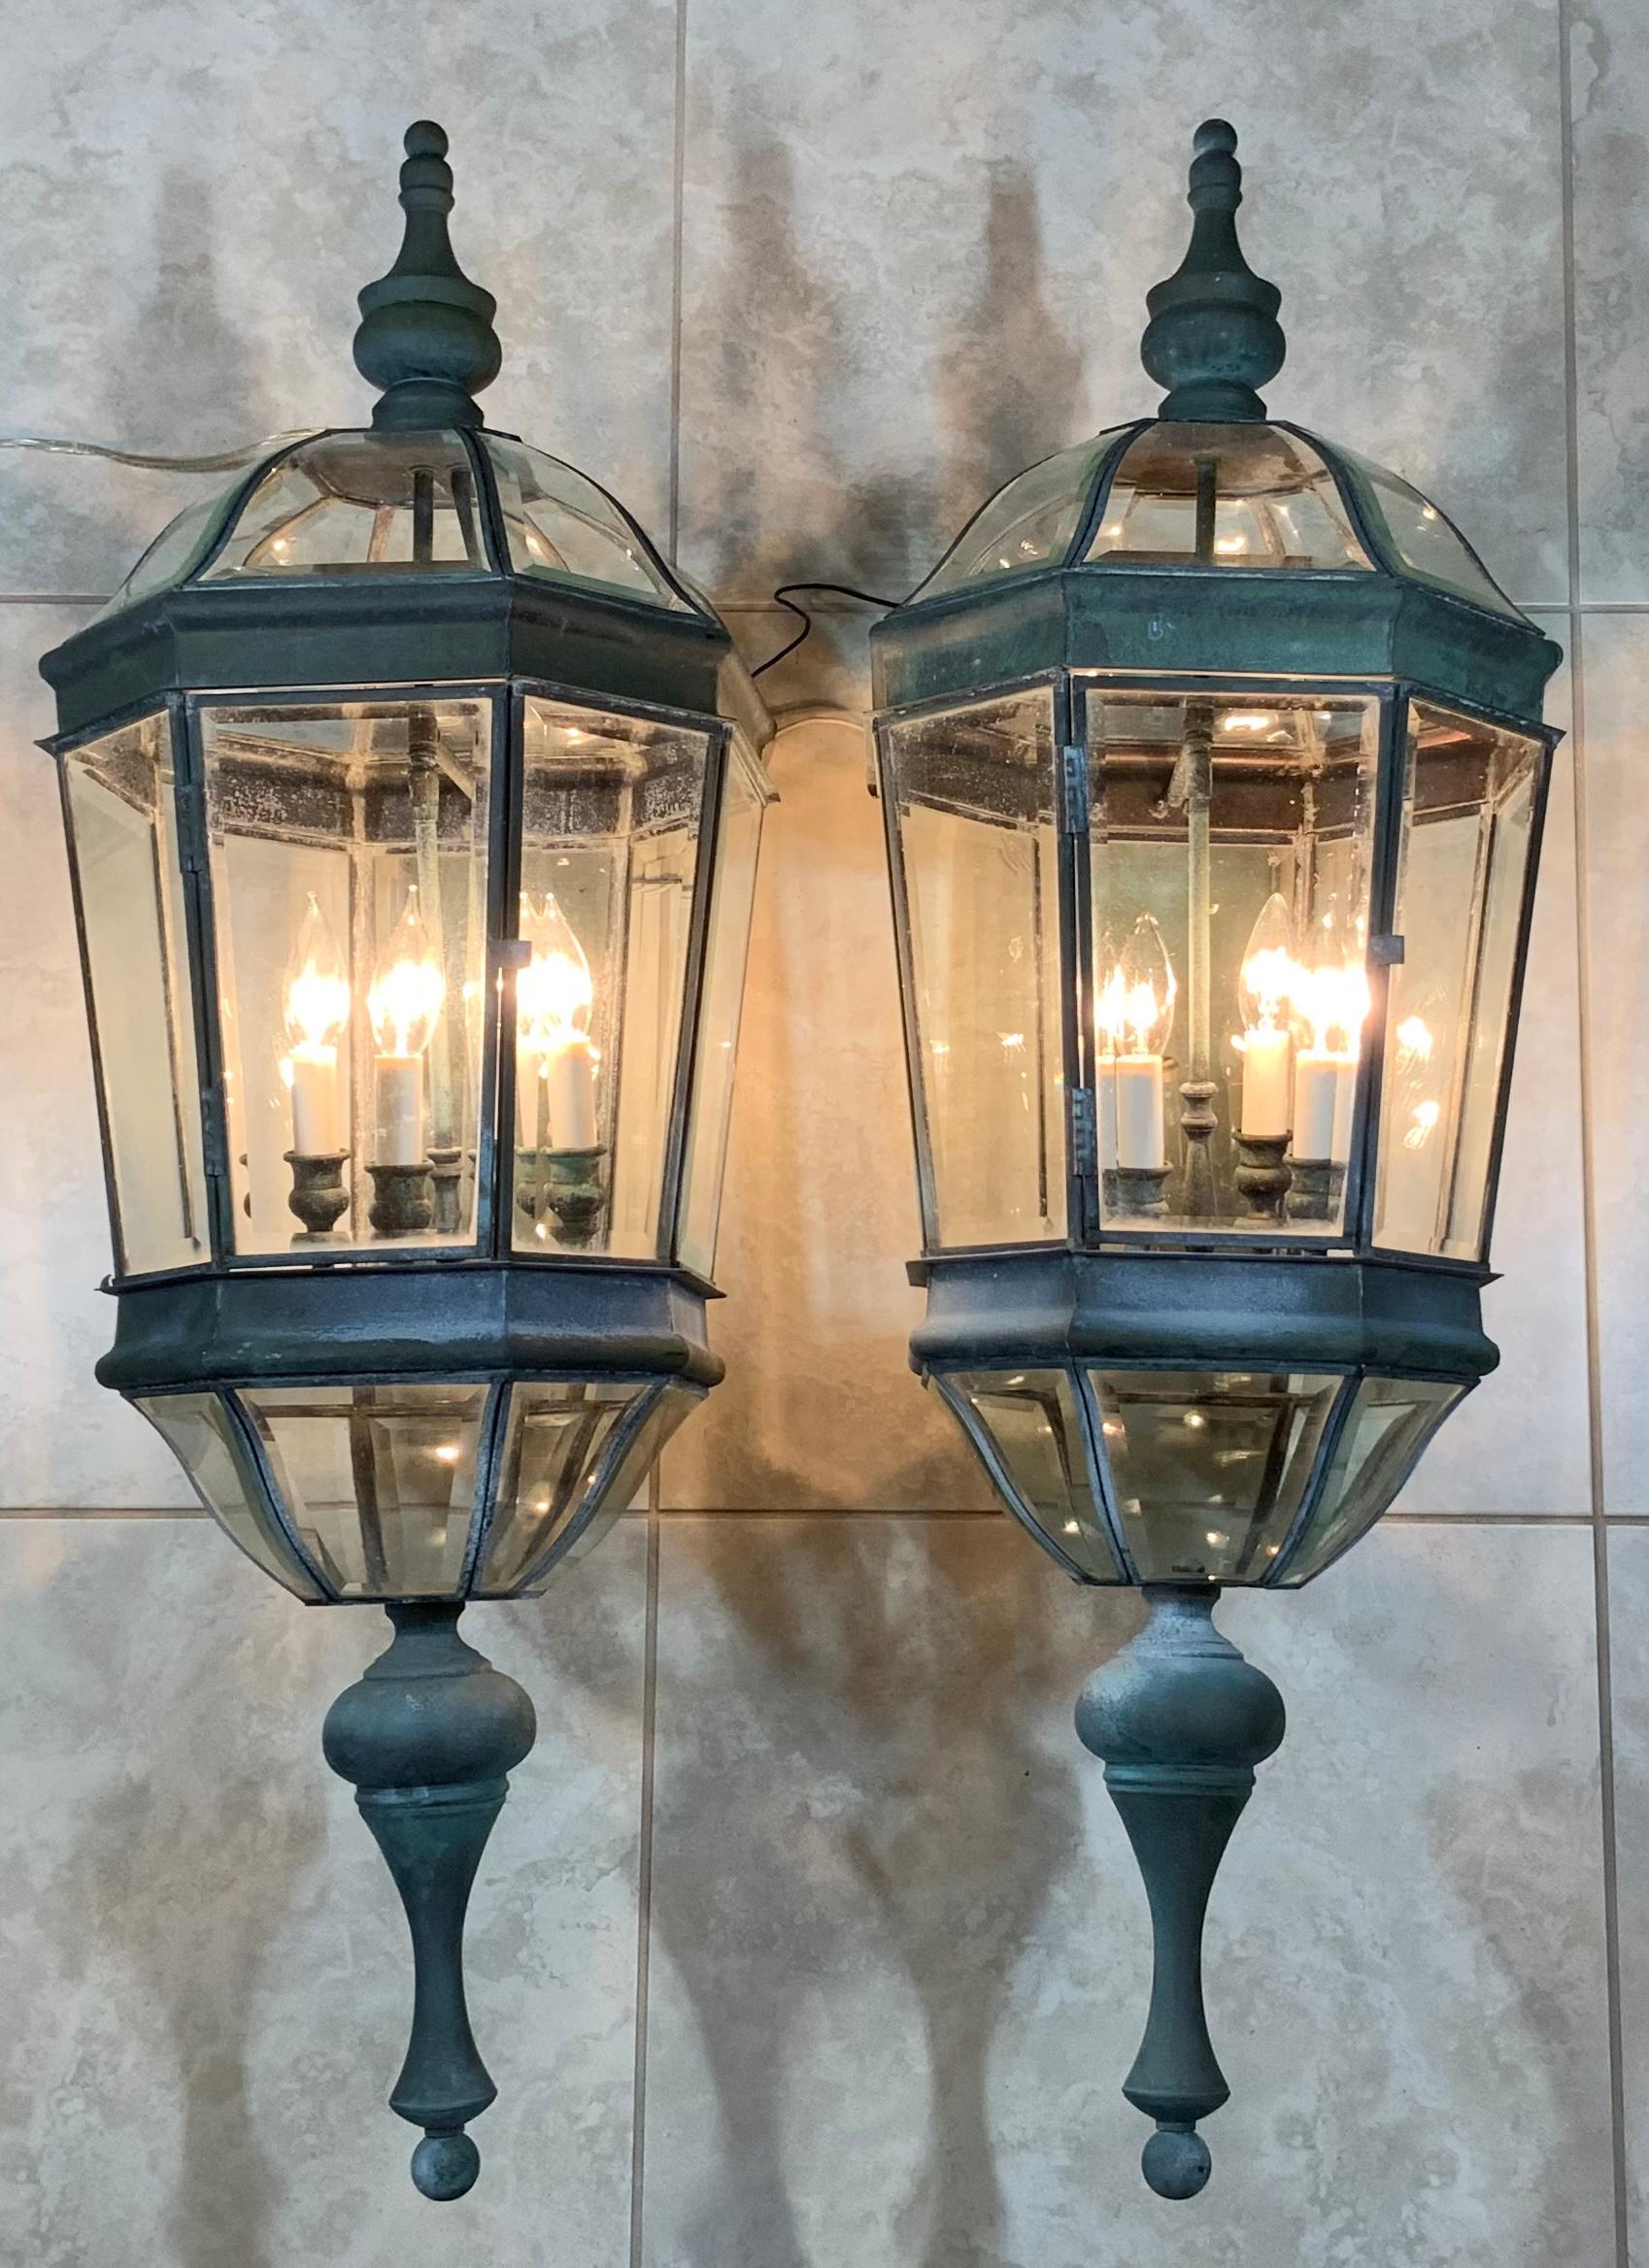 Exceptional large pair of wall lantern made of solid brass, quality workmanship, electrified with four 40/watt light each, beautiful beveled glass. Great light exposure.
Suitable for wet location. Penny size crack in the upper right glass on the